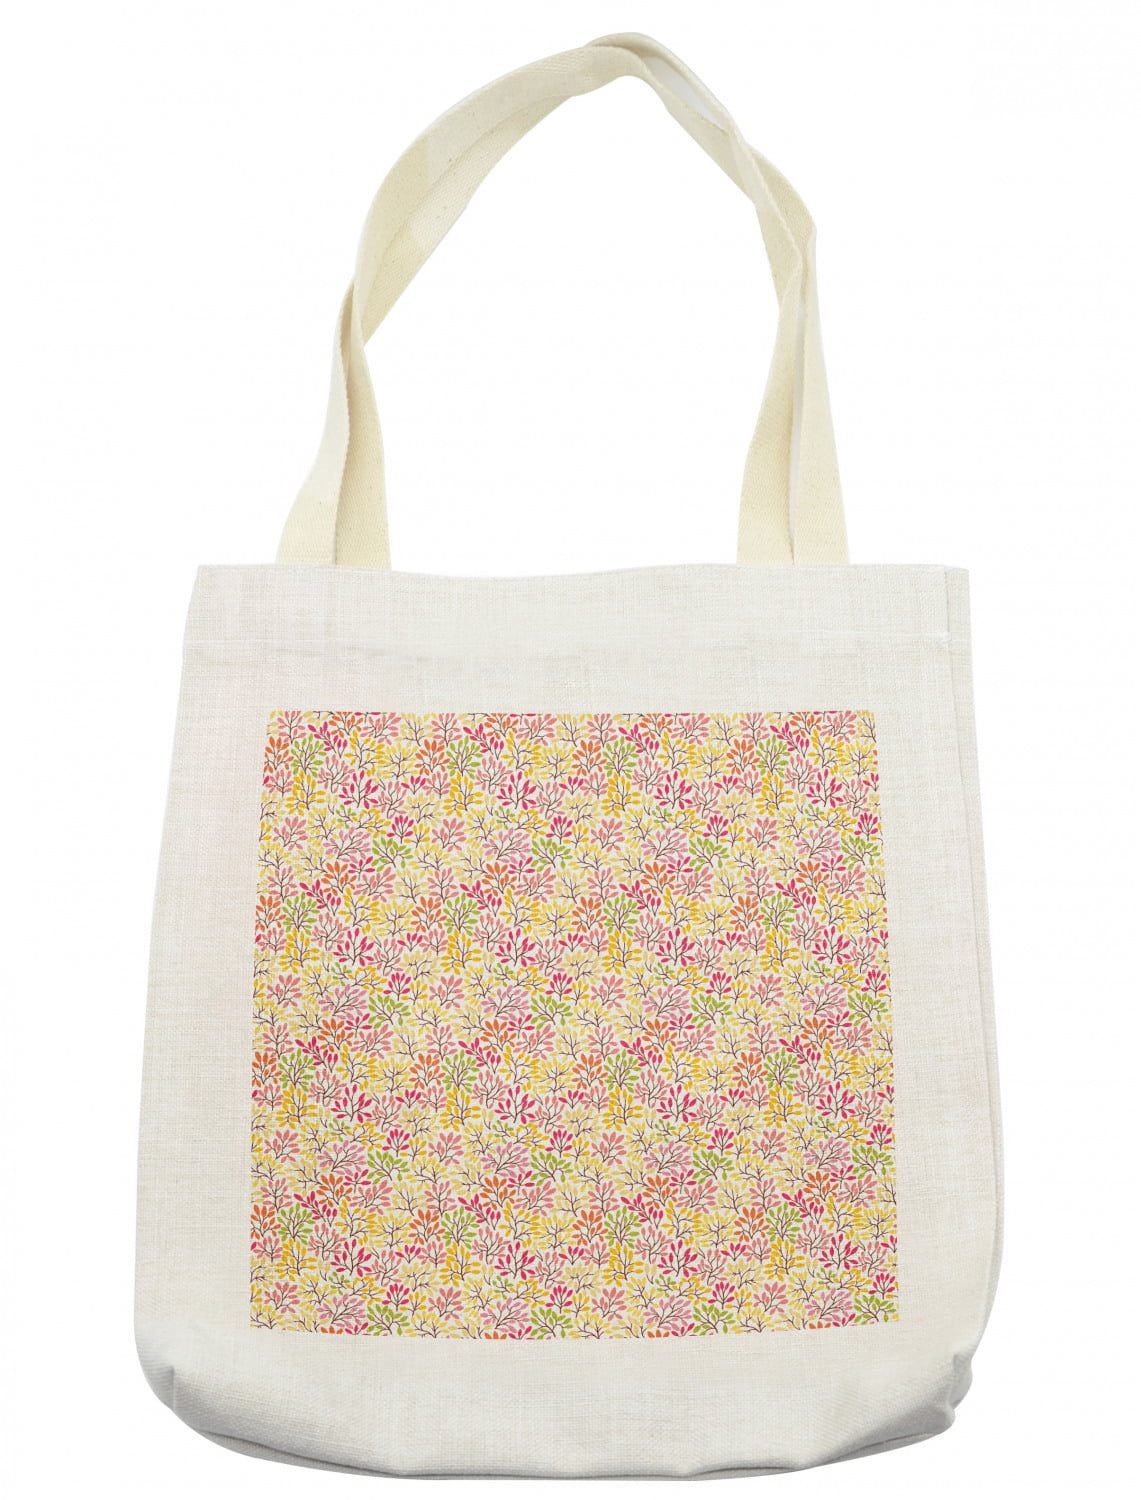 Pastel Tote Bag, Colorful Foliage Pattern with Twigs Full of Leaves ...